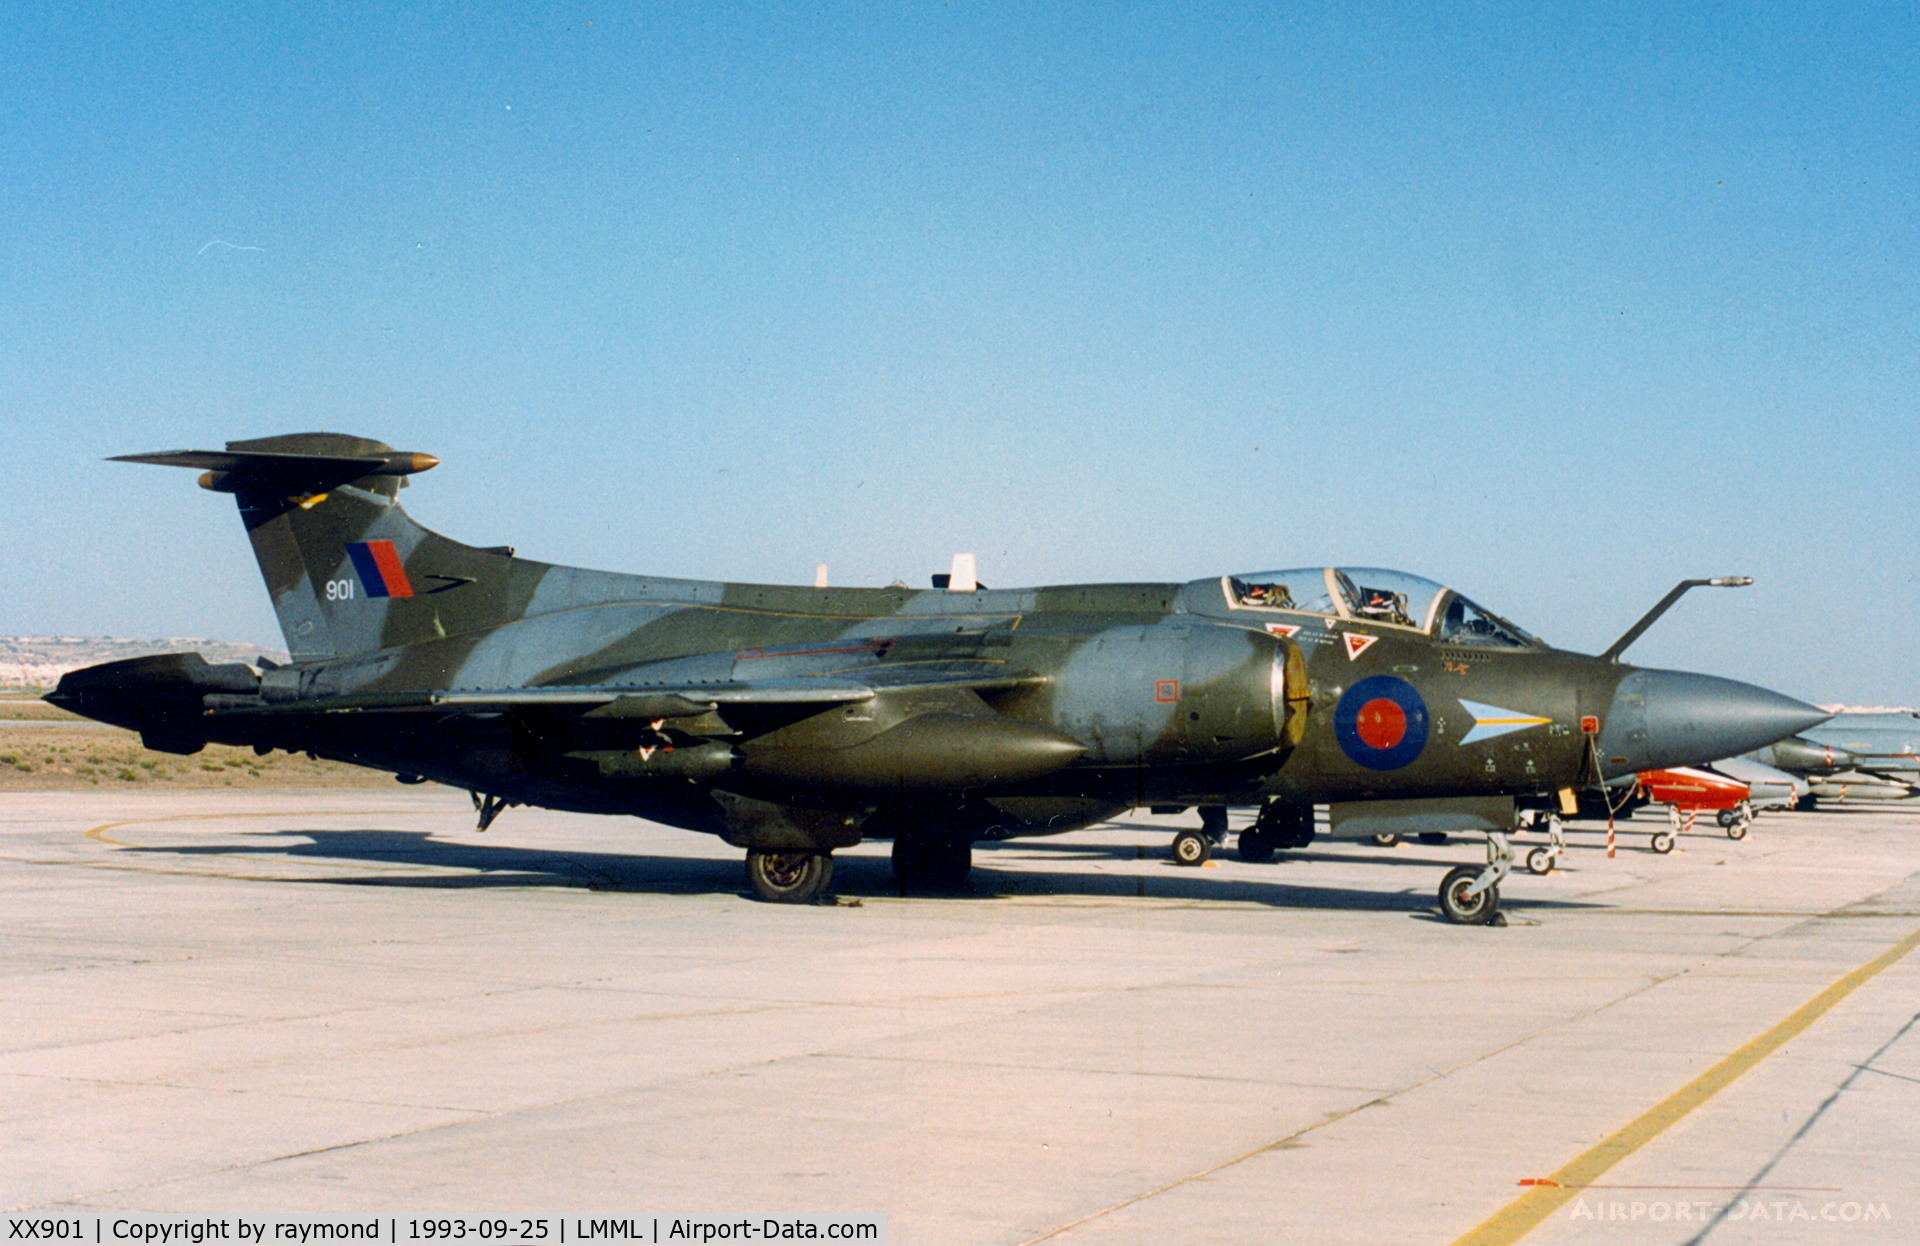 XX901, 1977 Hawker Siddeley Buccaneer S.2B C/N B3-06-75, Buccaneer XV901 208 Sqd RAF. This Bucc seen back in Malta in the first edition of the Malta International Airshow in 1993 after the British Forces withdrawn from their Malta Base on 31 March 1979. It was very nice indeed to see a Buccaneer back here!!